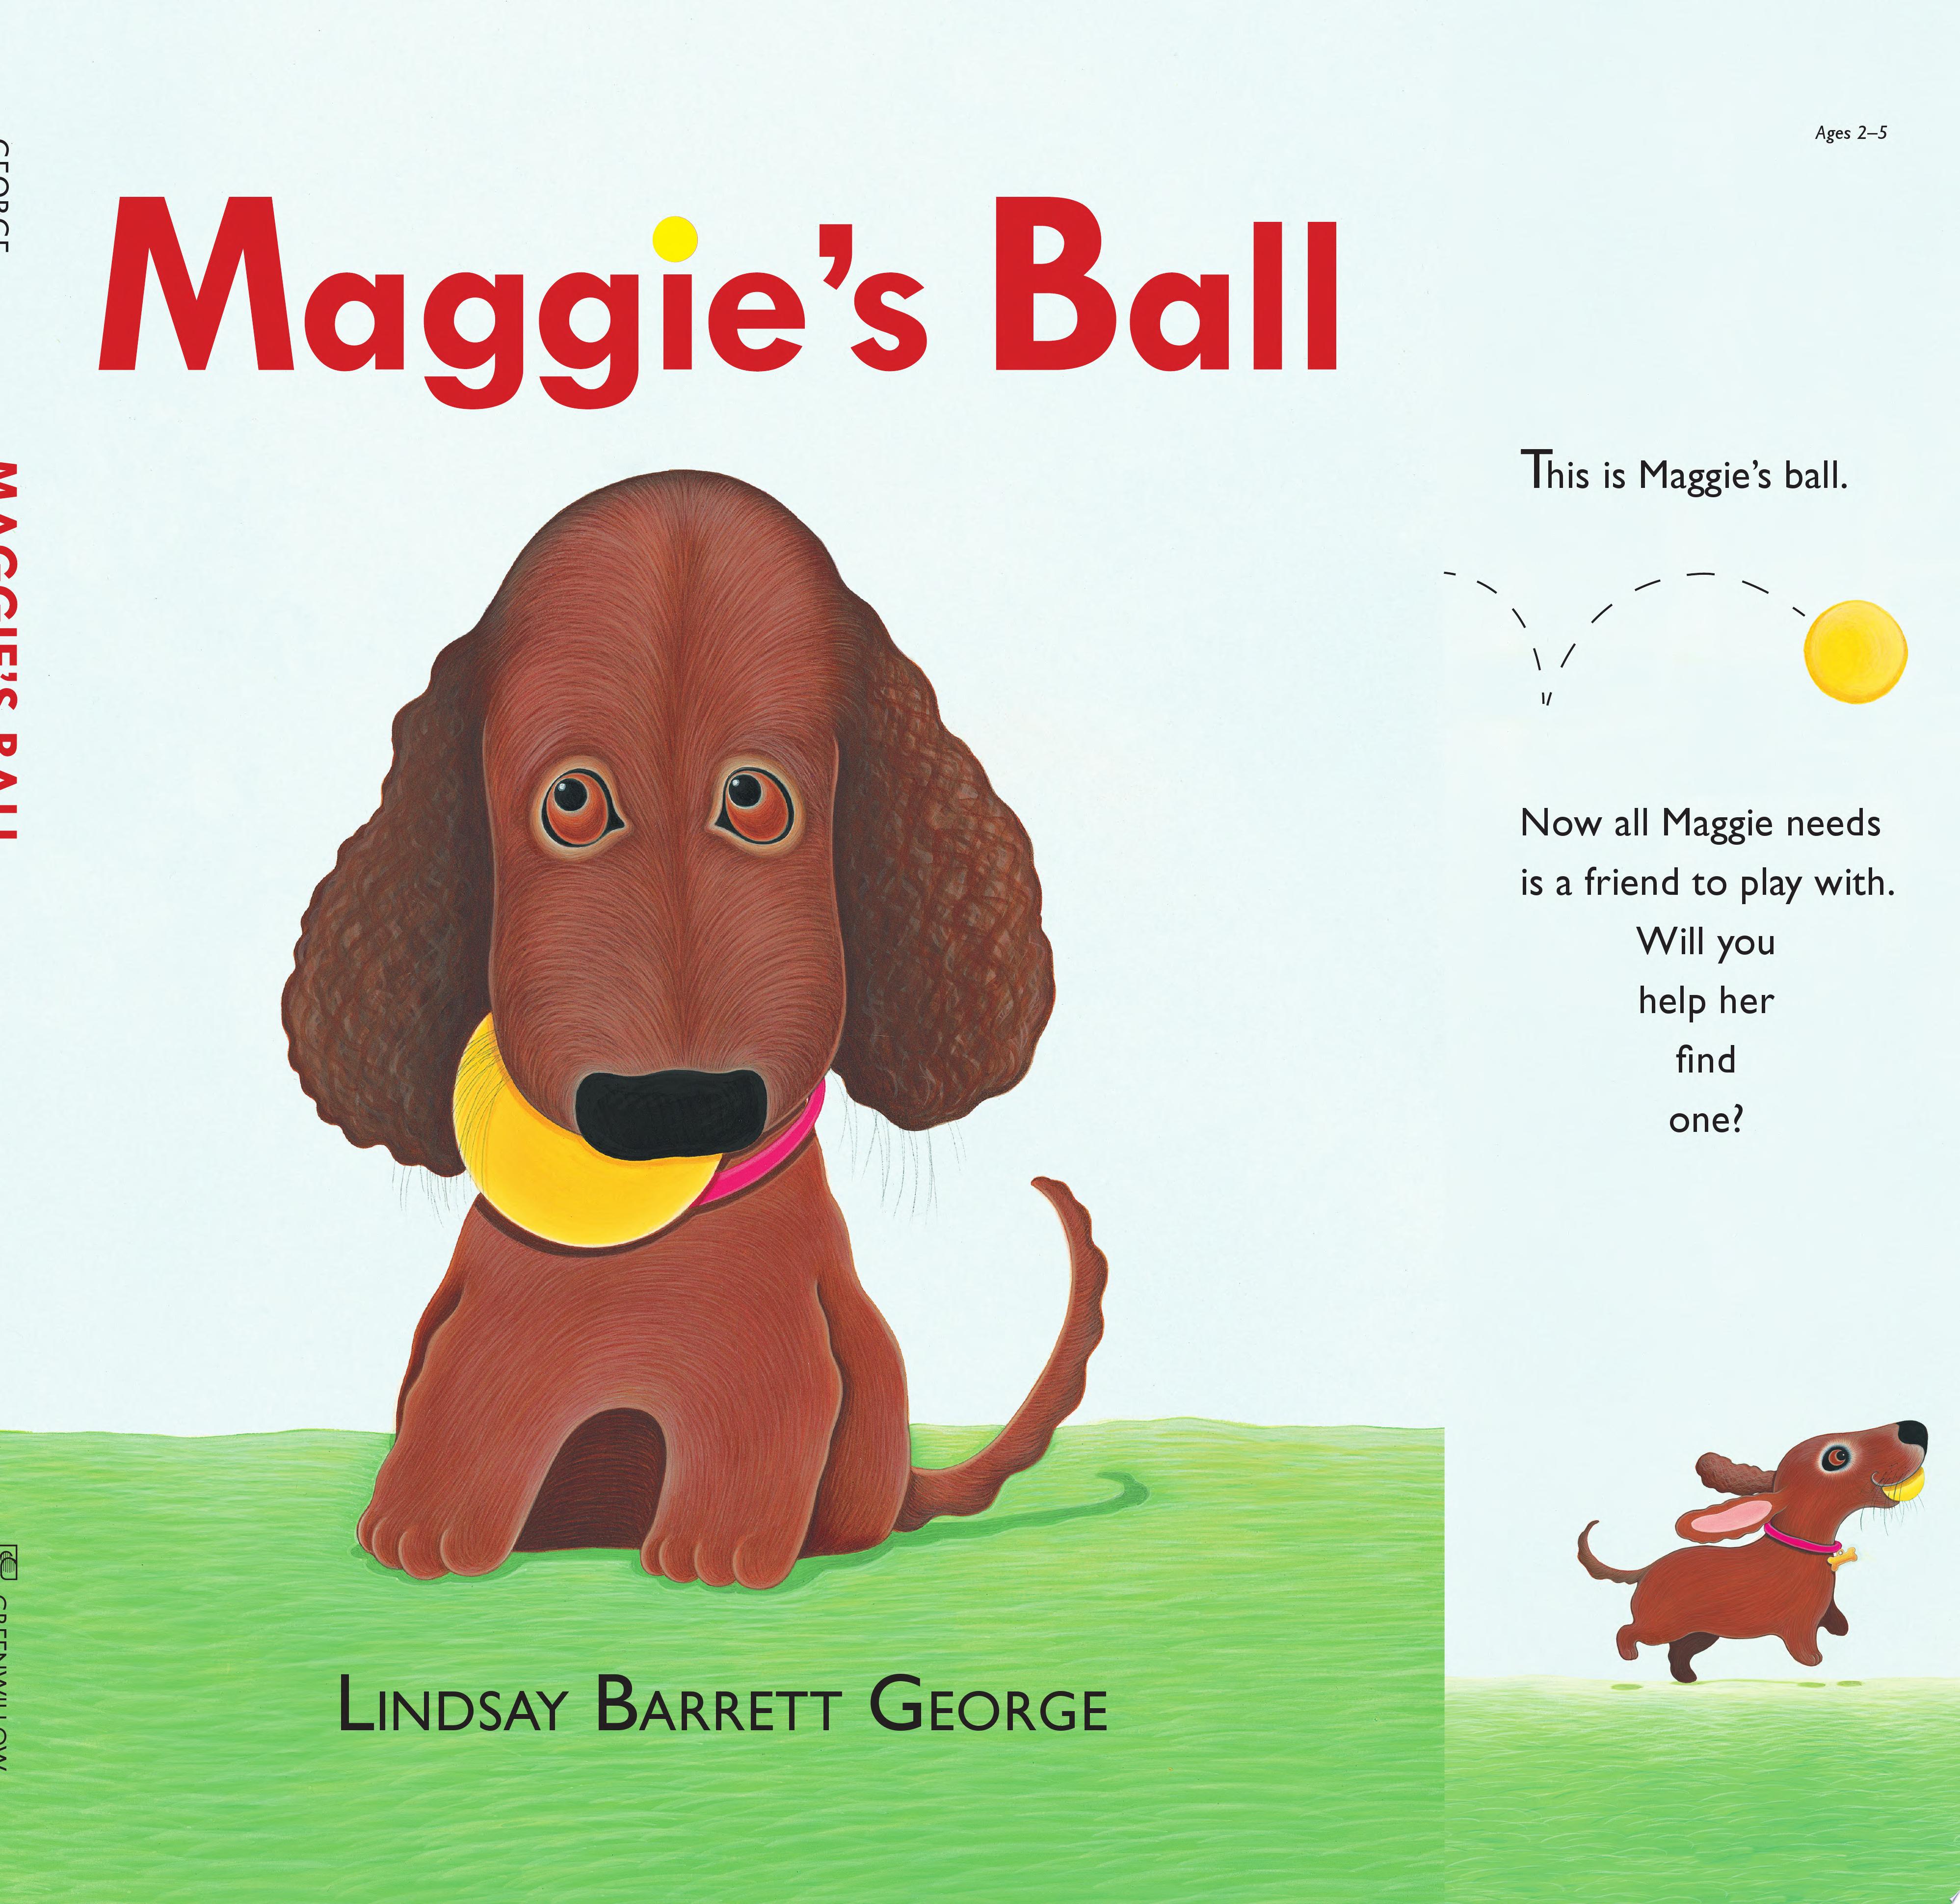 Image for "Maggie's Ball"